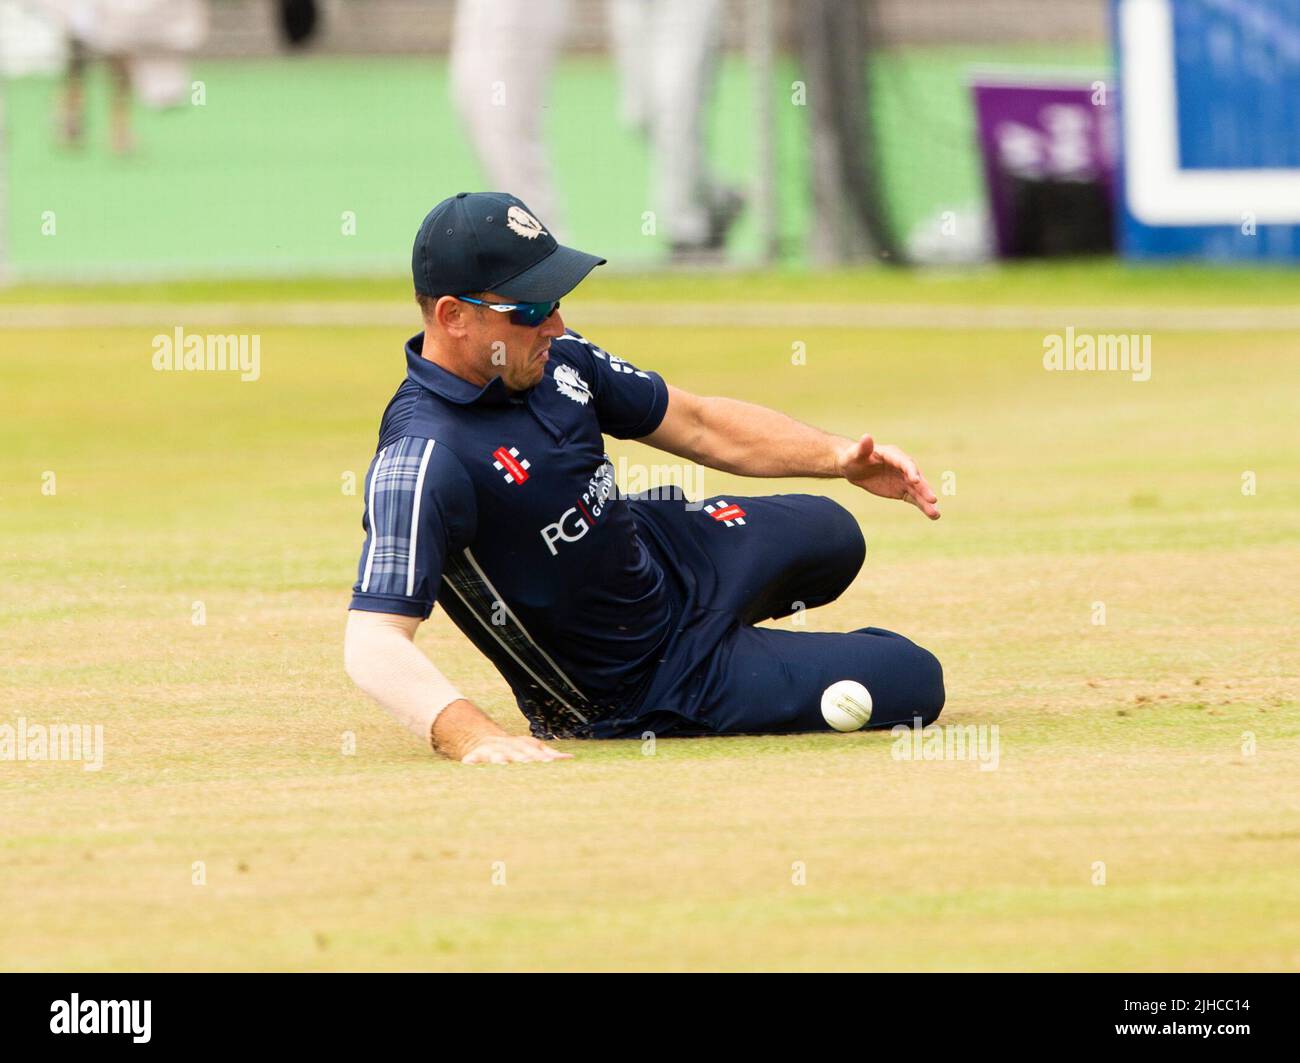 ICC Men's Cricket World Cup League 2 - Scotland v, Nepal. 17th July, 2022. Scotland take on Nepal for the second time in the ICC Div 2 Men's Cricket World Cup League 2 at Titwood, Glasgow. Pic shows: Great stop by Scotland's Chris Greaves. Credit: Ian Jacobs/Alamy Live News Stock Photo